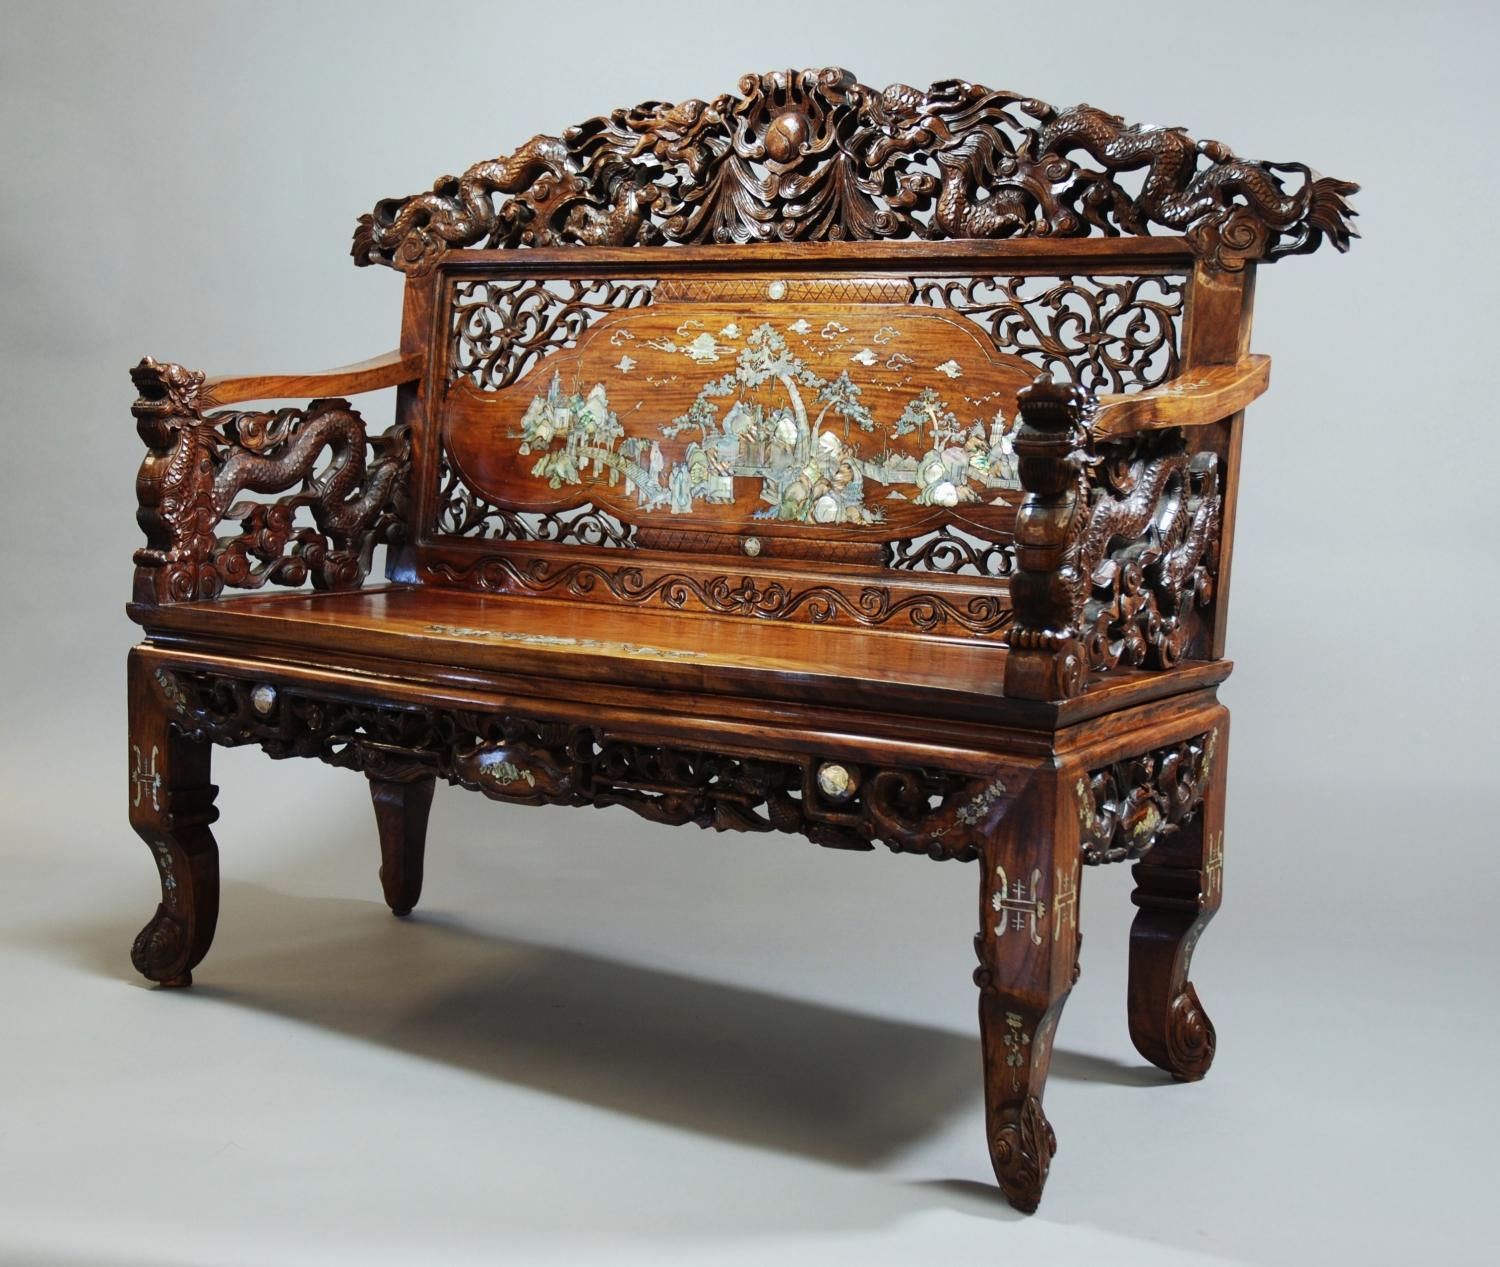 Carved Chinese & inlaid hardwood low bench 